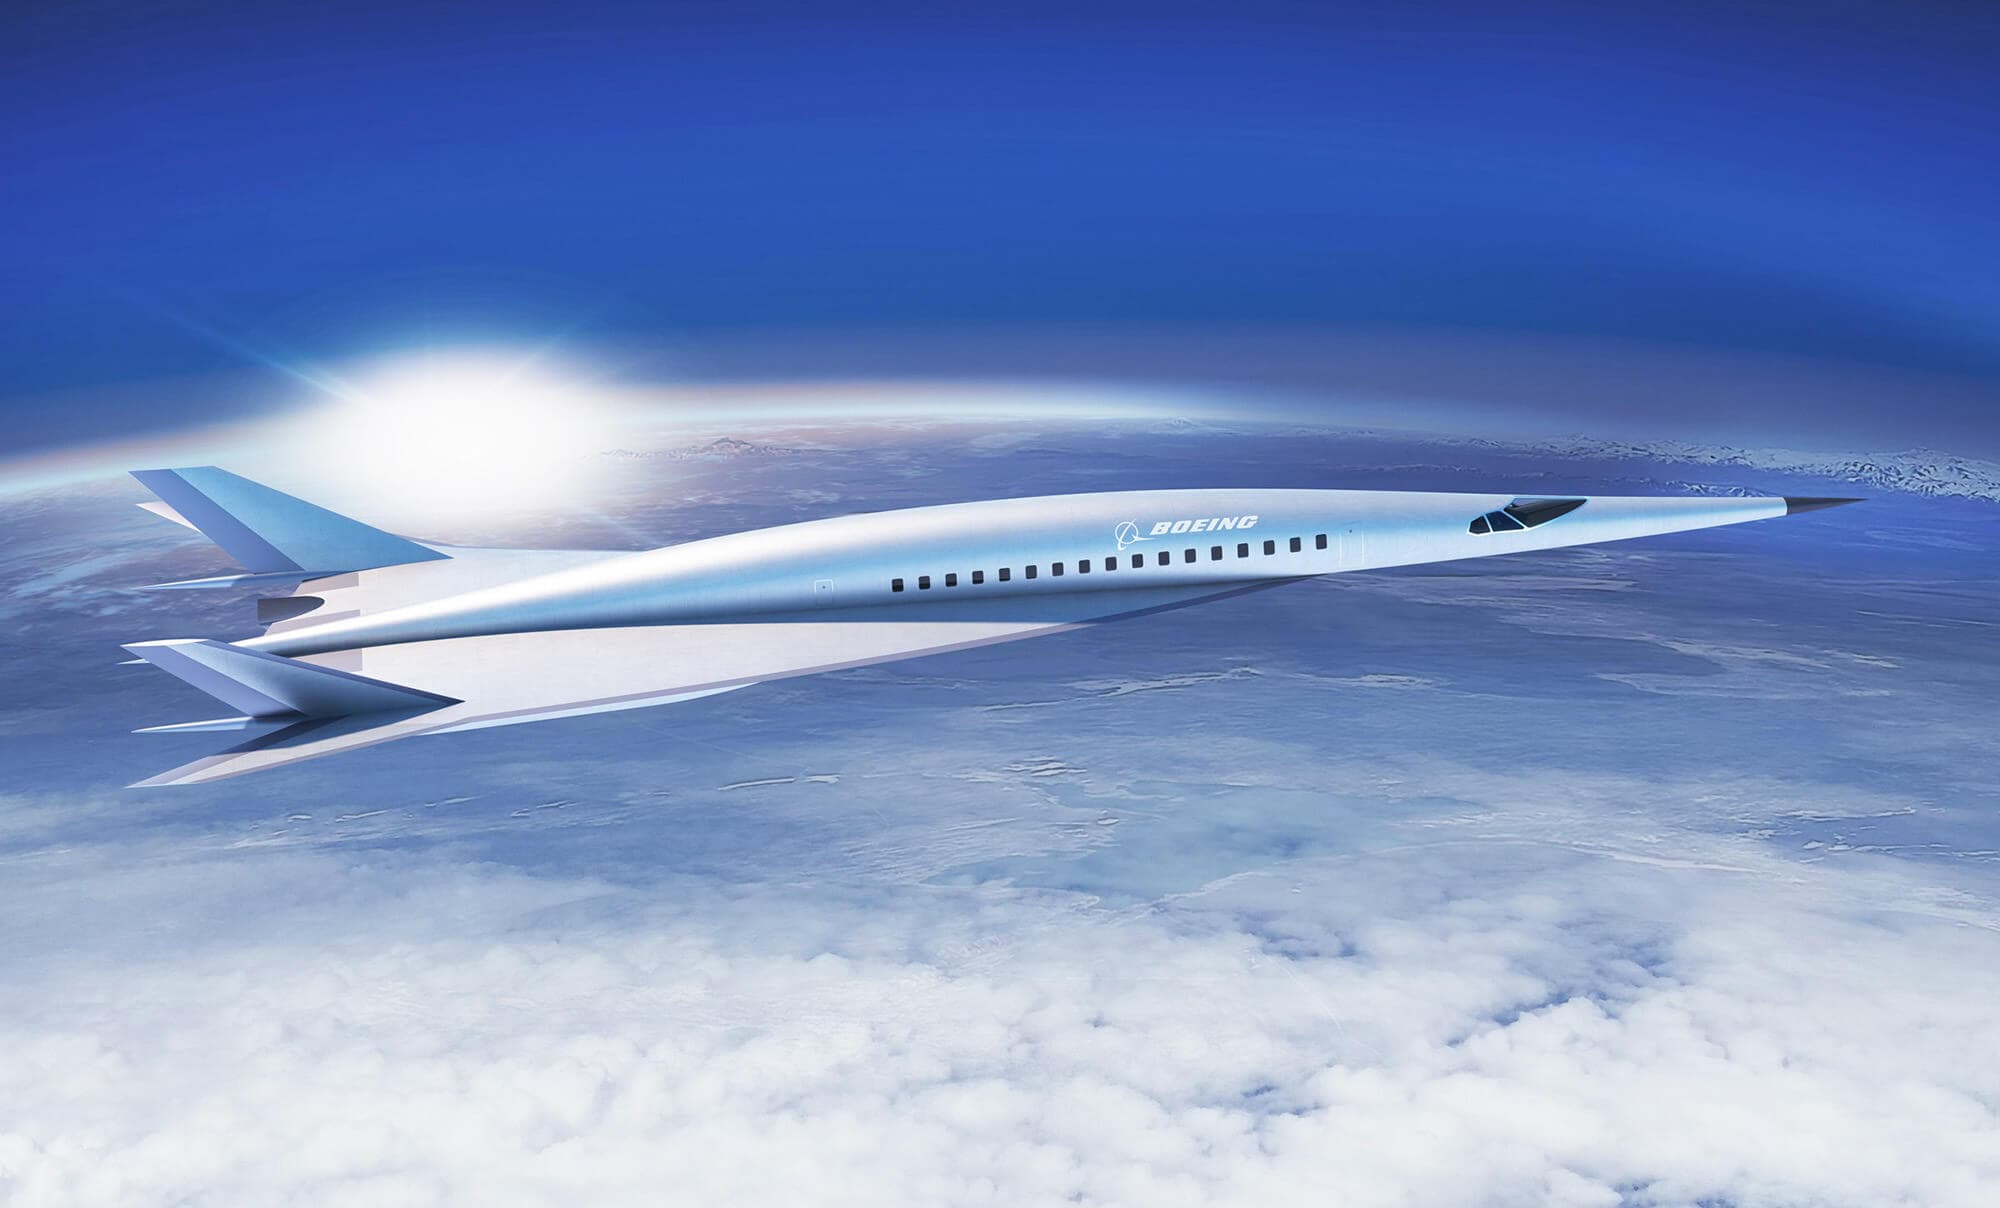 Boeing hypersonic jet concept